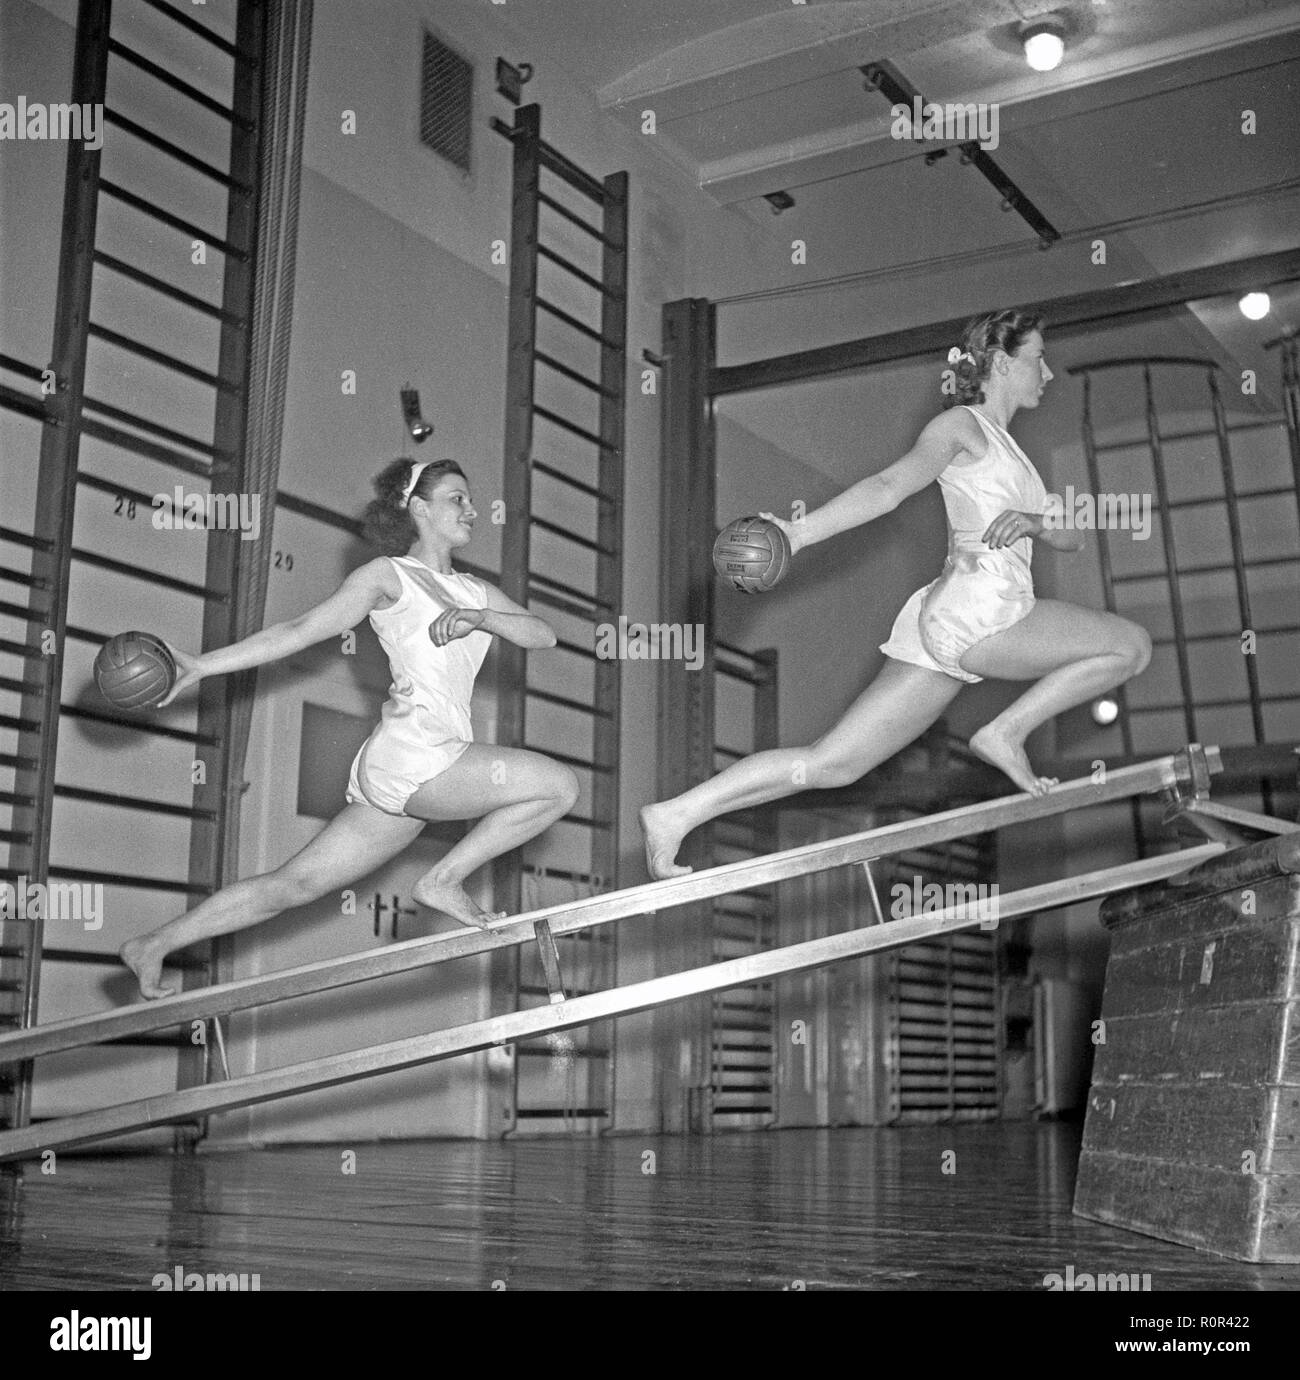 Gymnastics in the 1940s. Two young women are balancing on gymnasium equipment and at the same time synchronizing their movements holding balls. 1940s Sweden Photo Kristoffersson ref AN70-4 Stock Photo